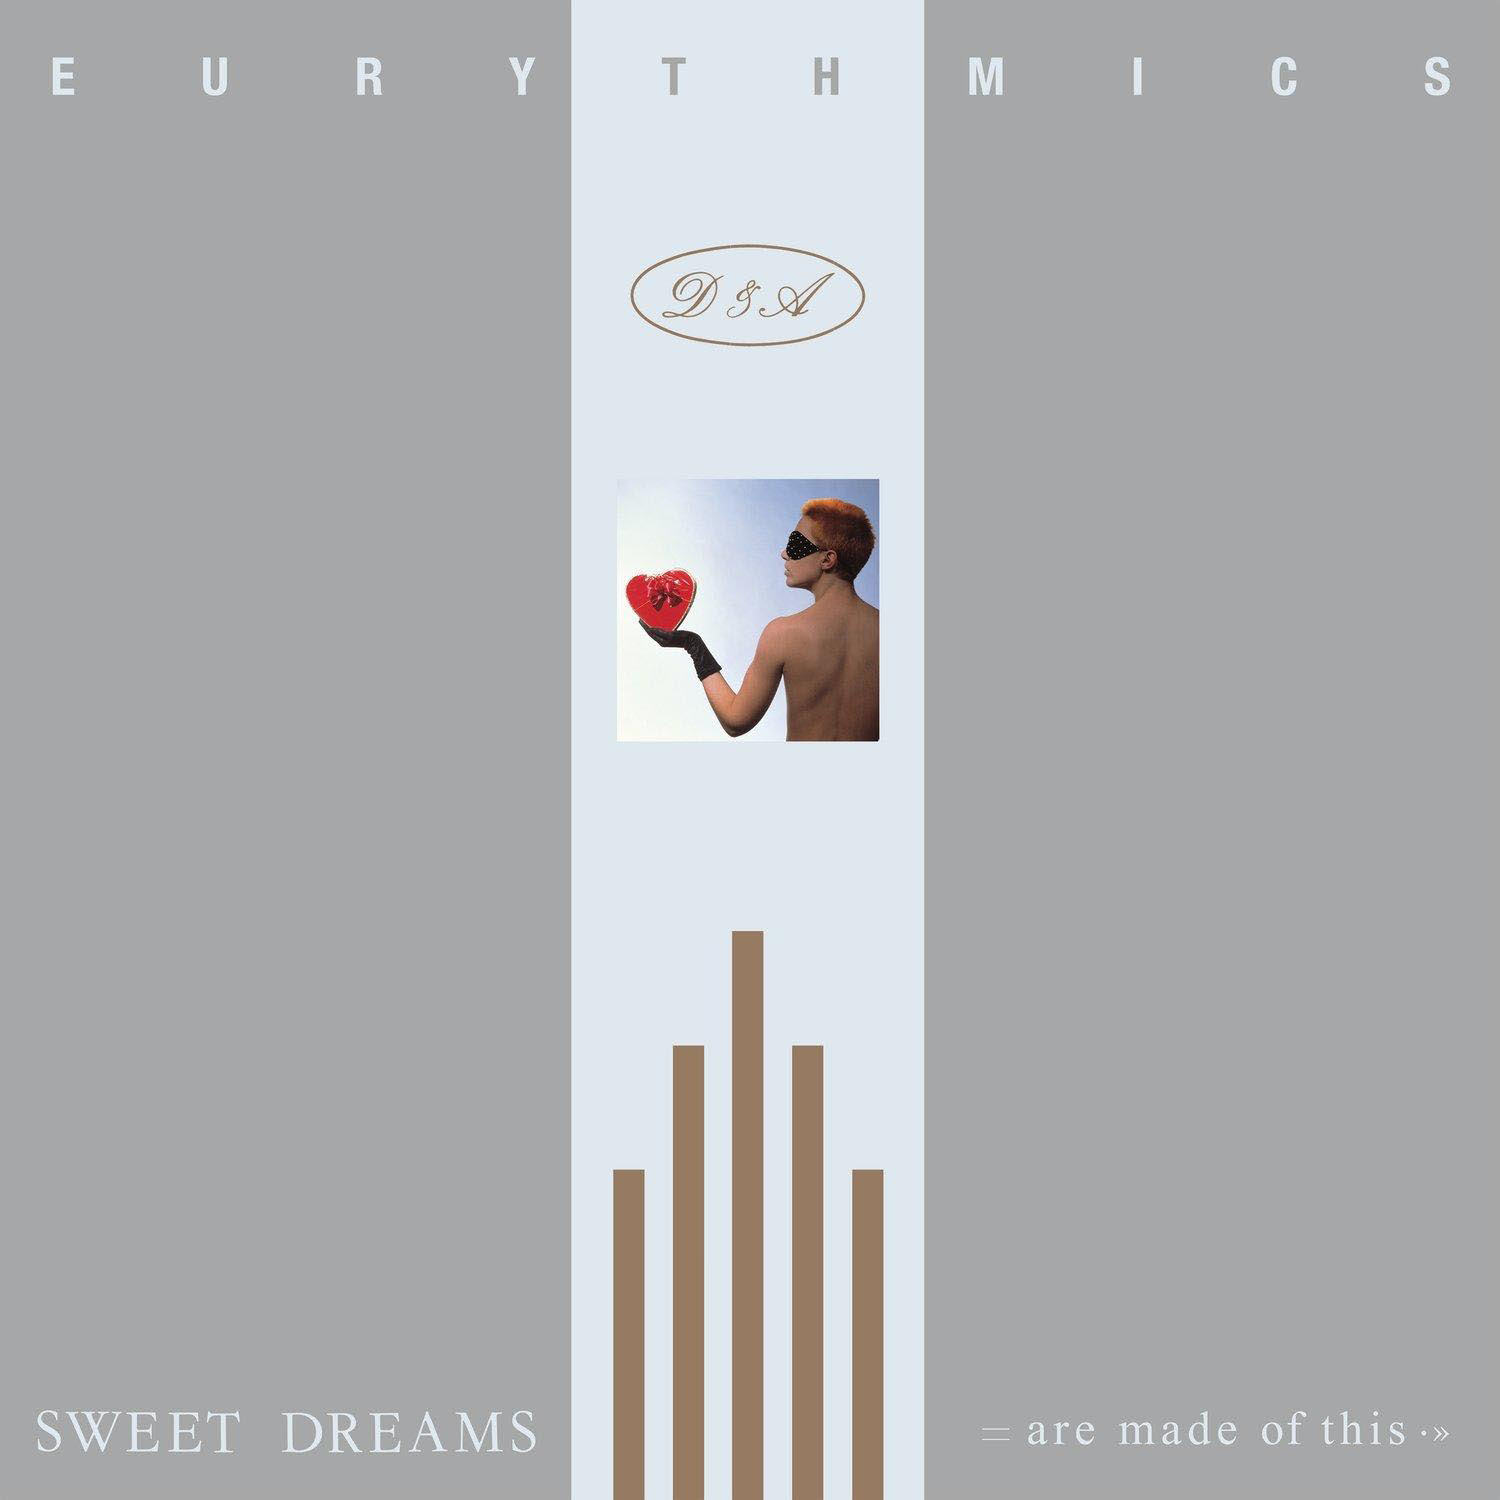 Dreams Eurythmics Sweet Made of - (Are - (Vinyl) This)